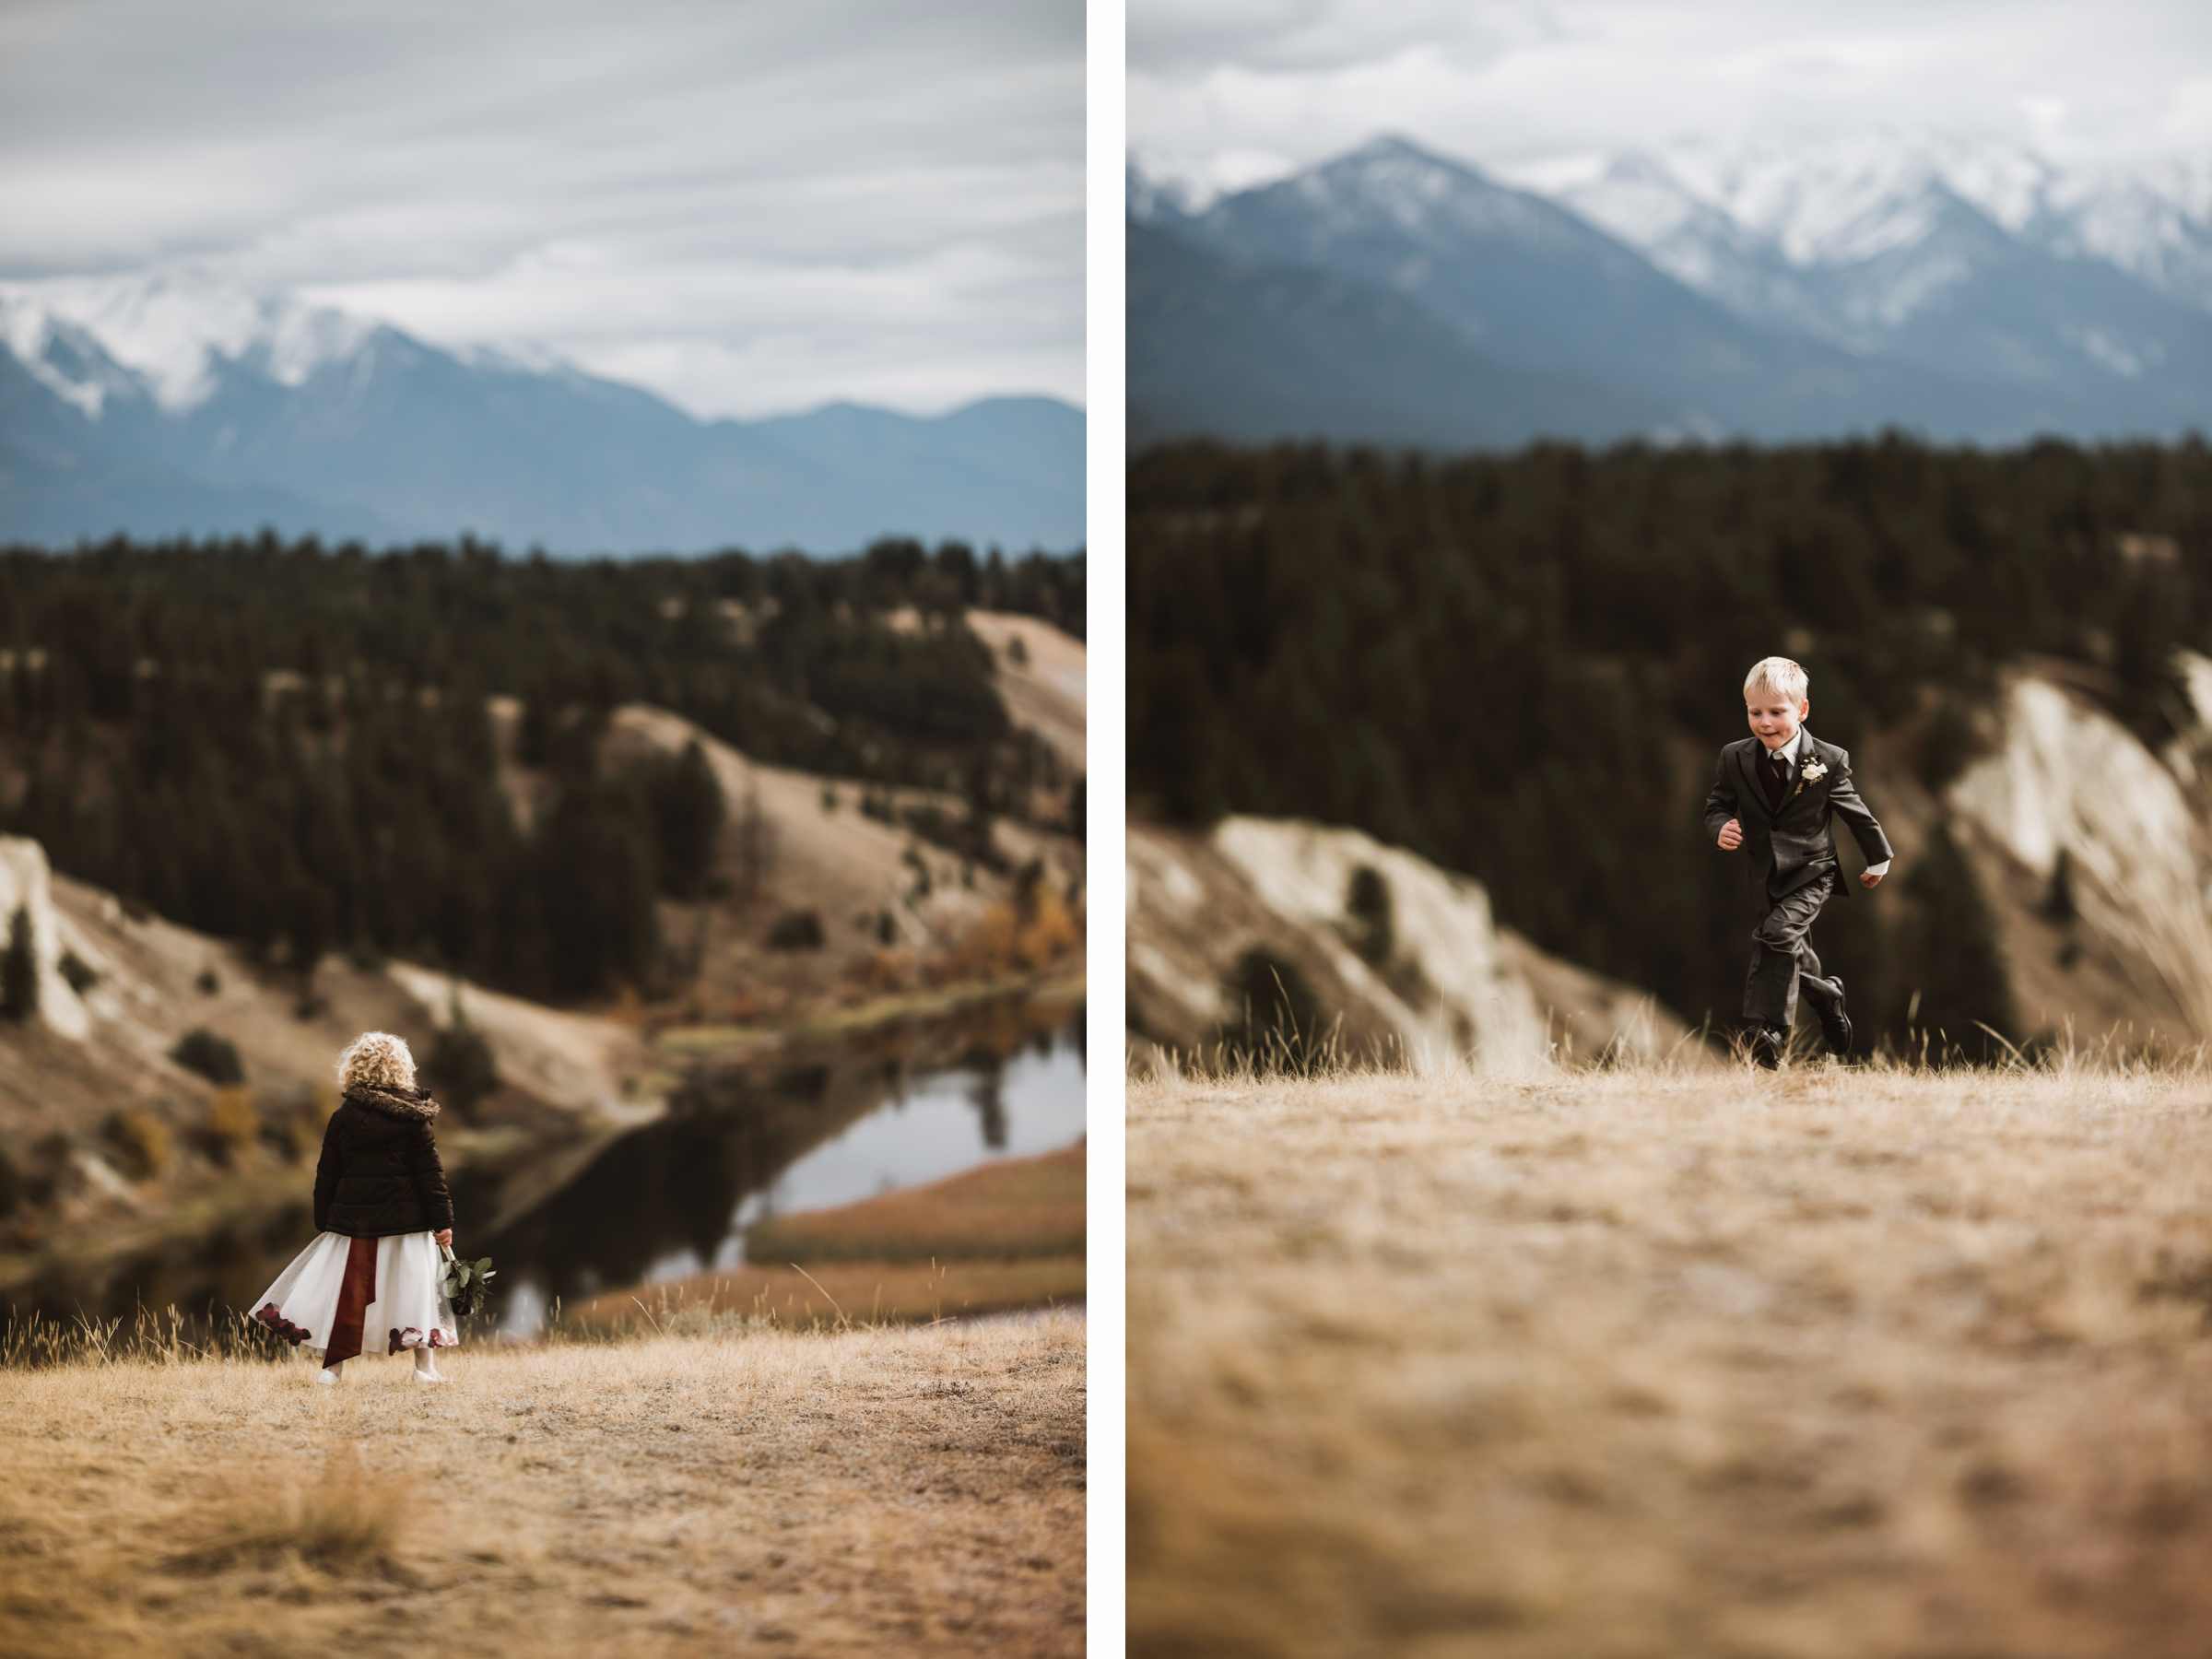 Calgary wedding photographer in Invermere for adventurous mountain destination elopement at Eagle Ranch Golf Resort, British Columbia - Image 19